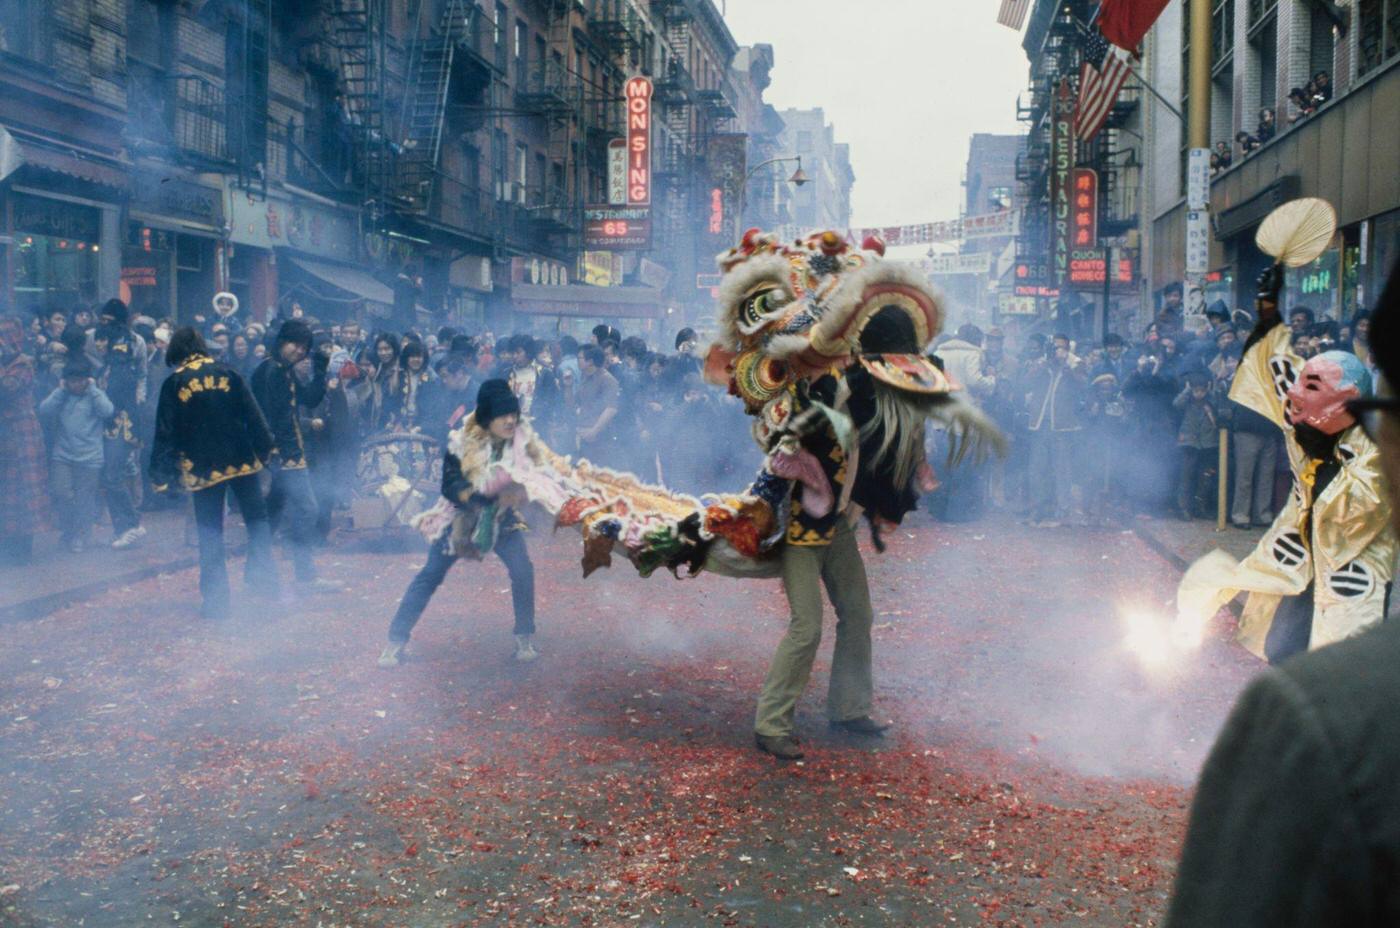 Chinese Dancers Usher In The Year Of The Ox In Chinatown Neighborhood Of Manhattan, 1973.